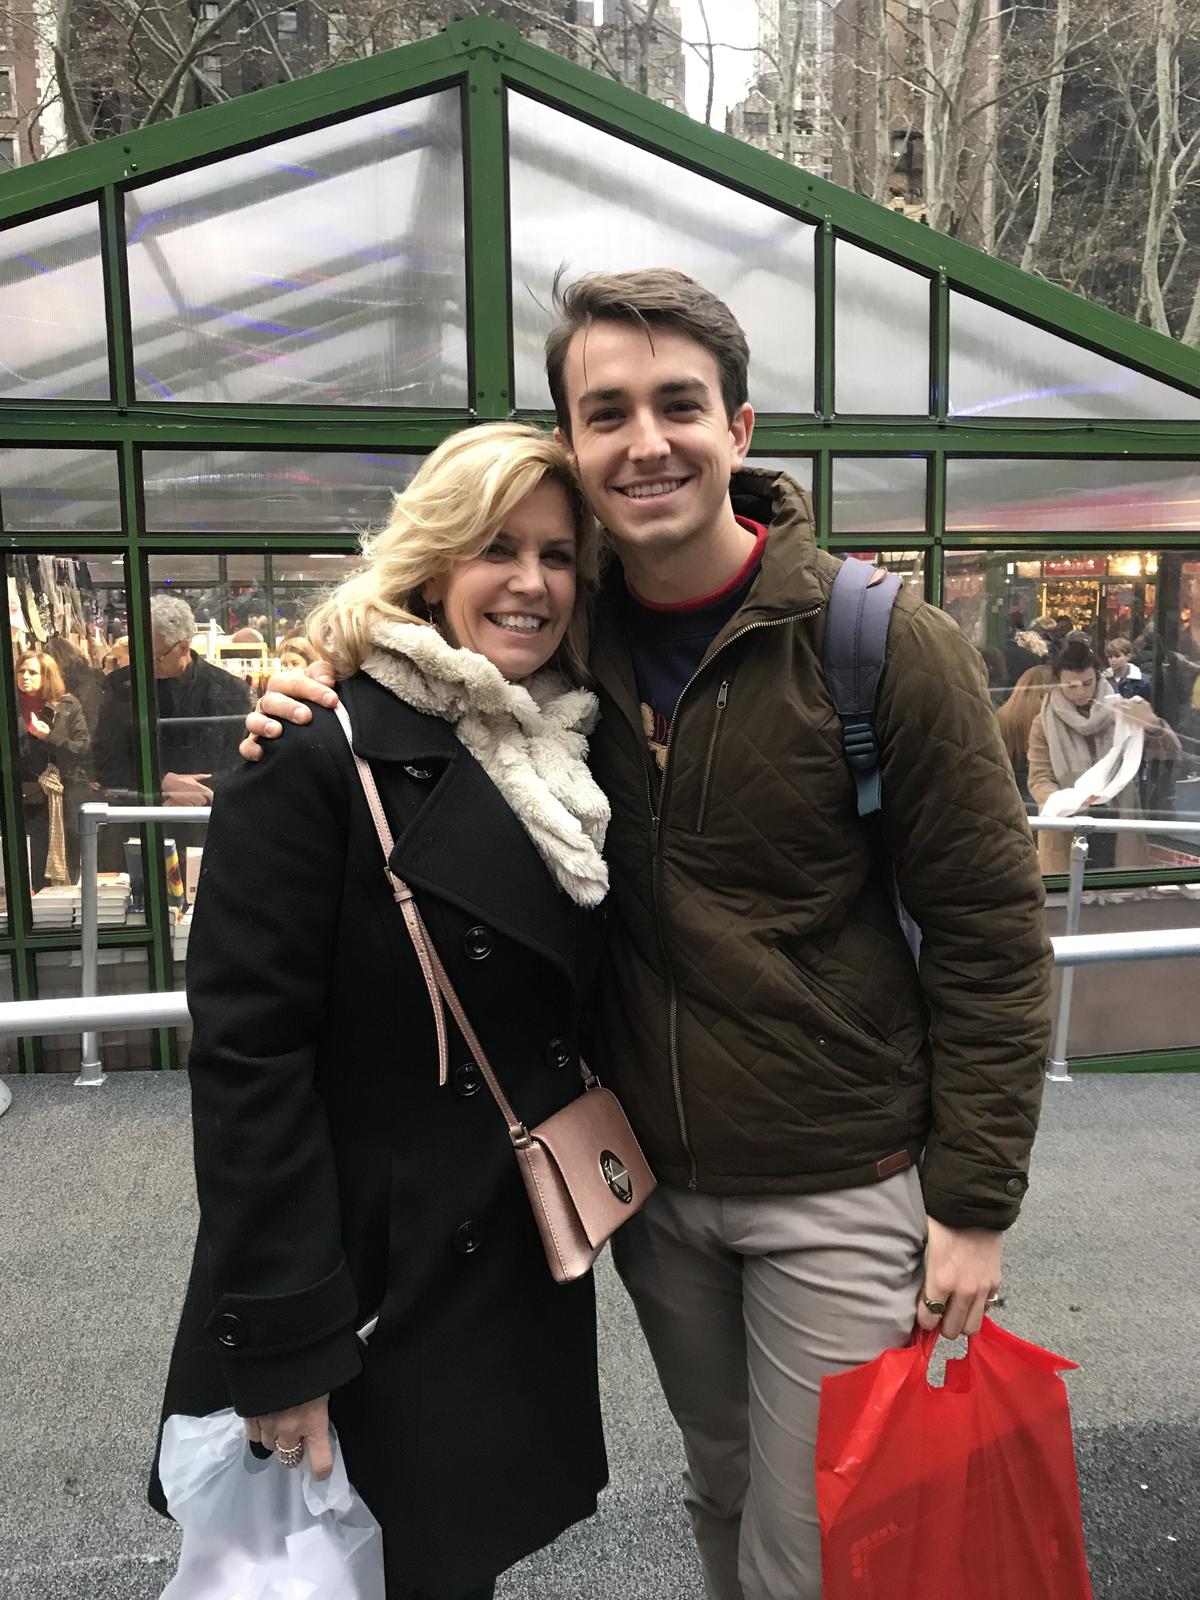 Christian and Julie Probst at Bryant Park, New York, on Dec 14, 2018. (Stuart Liess/The Epoch Times)